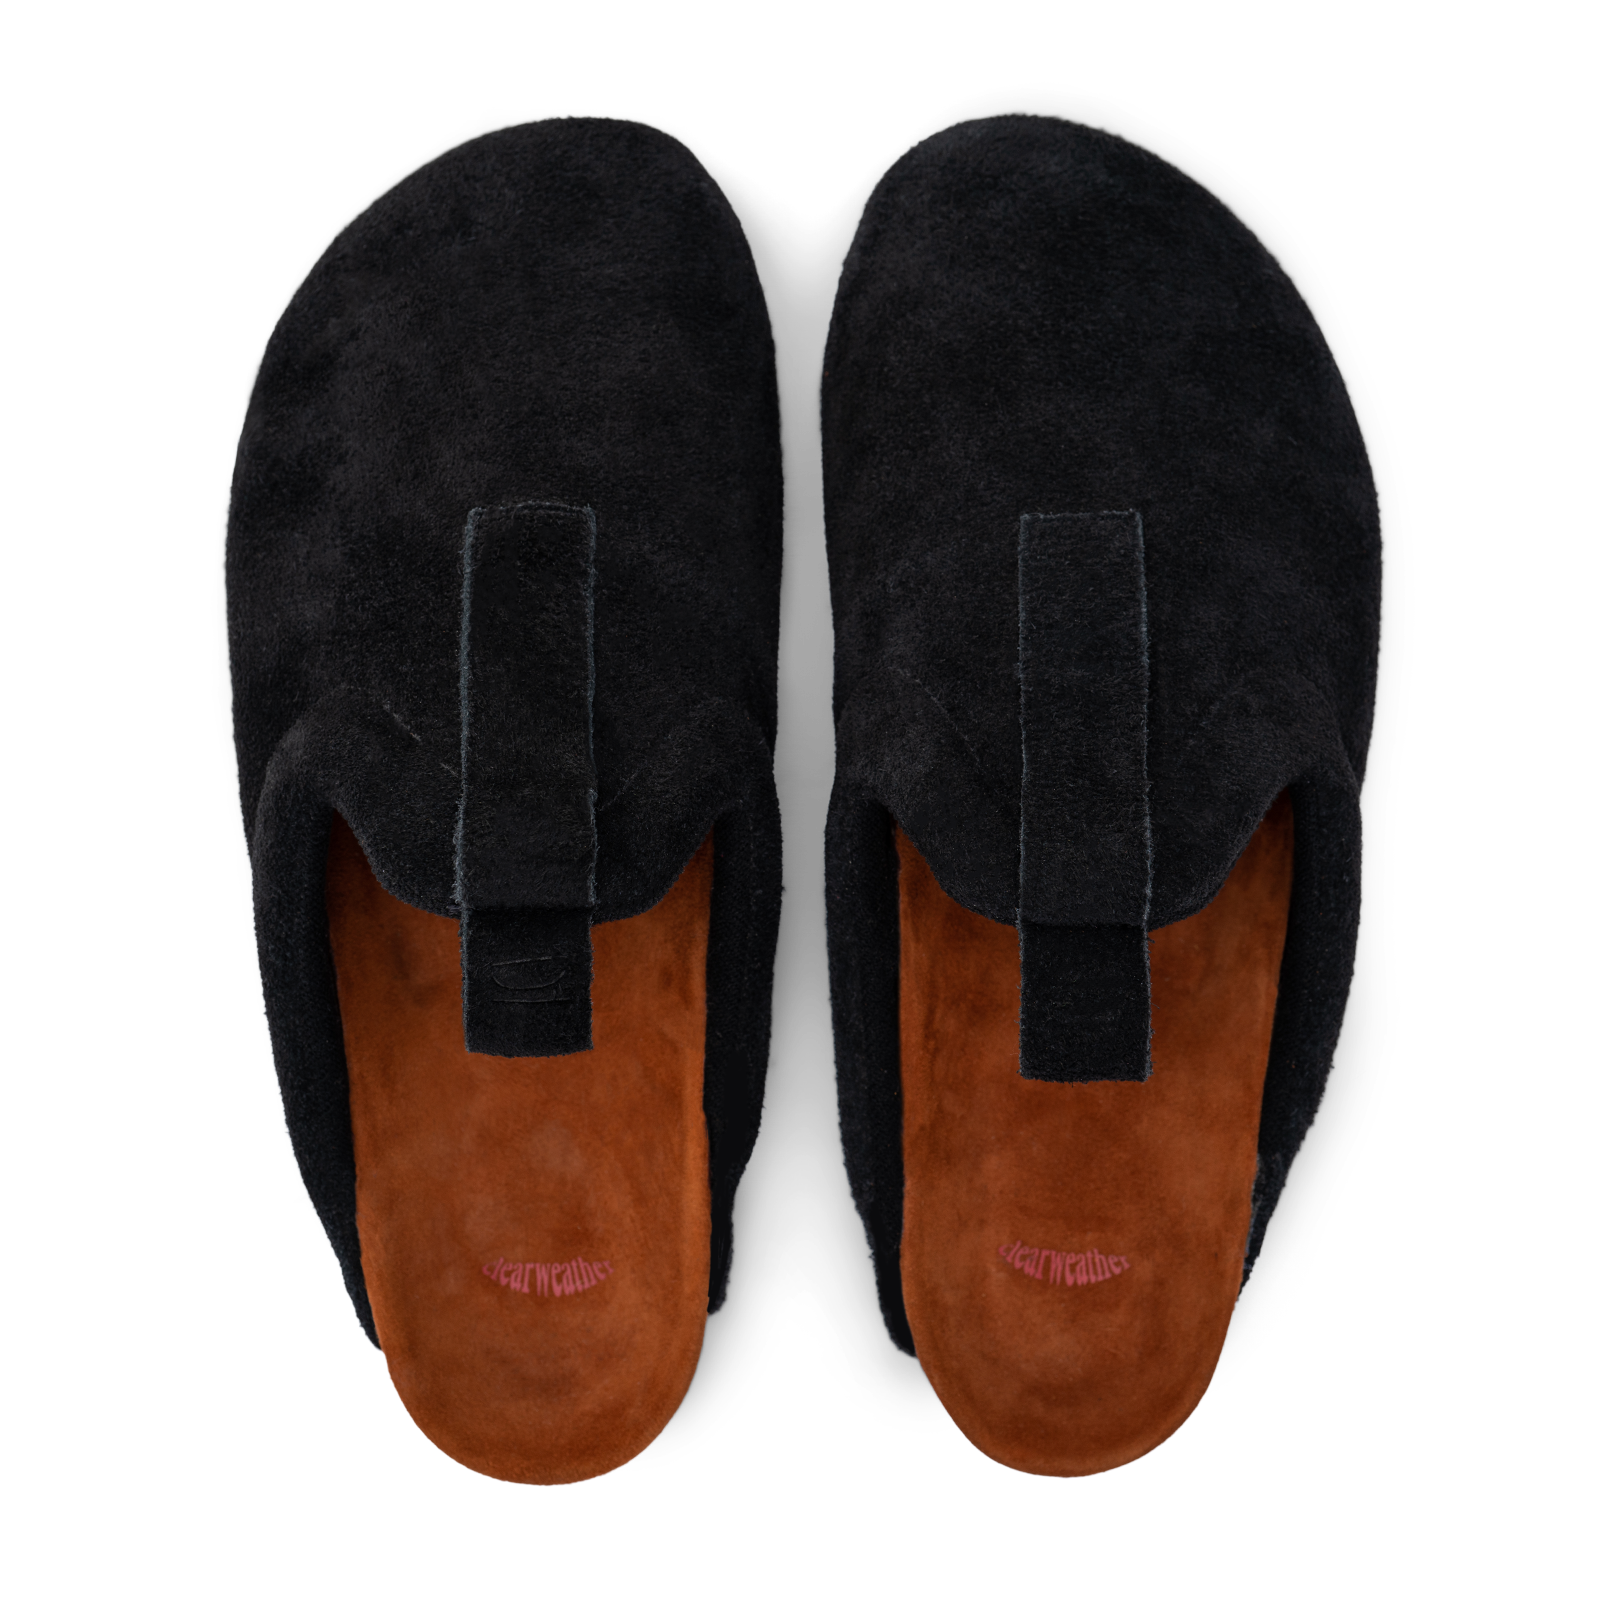 top view Bantha Black suede upper, cork midsole wrapped in soft suede, Vibram sheet gum rubber outsole red clearweather logo